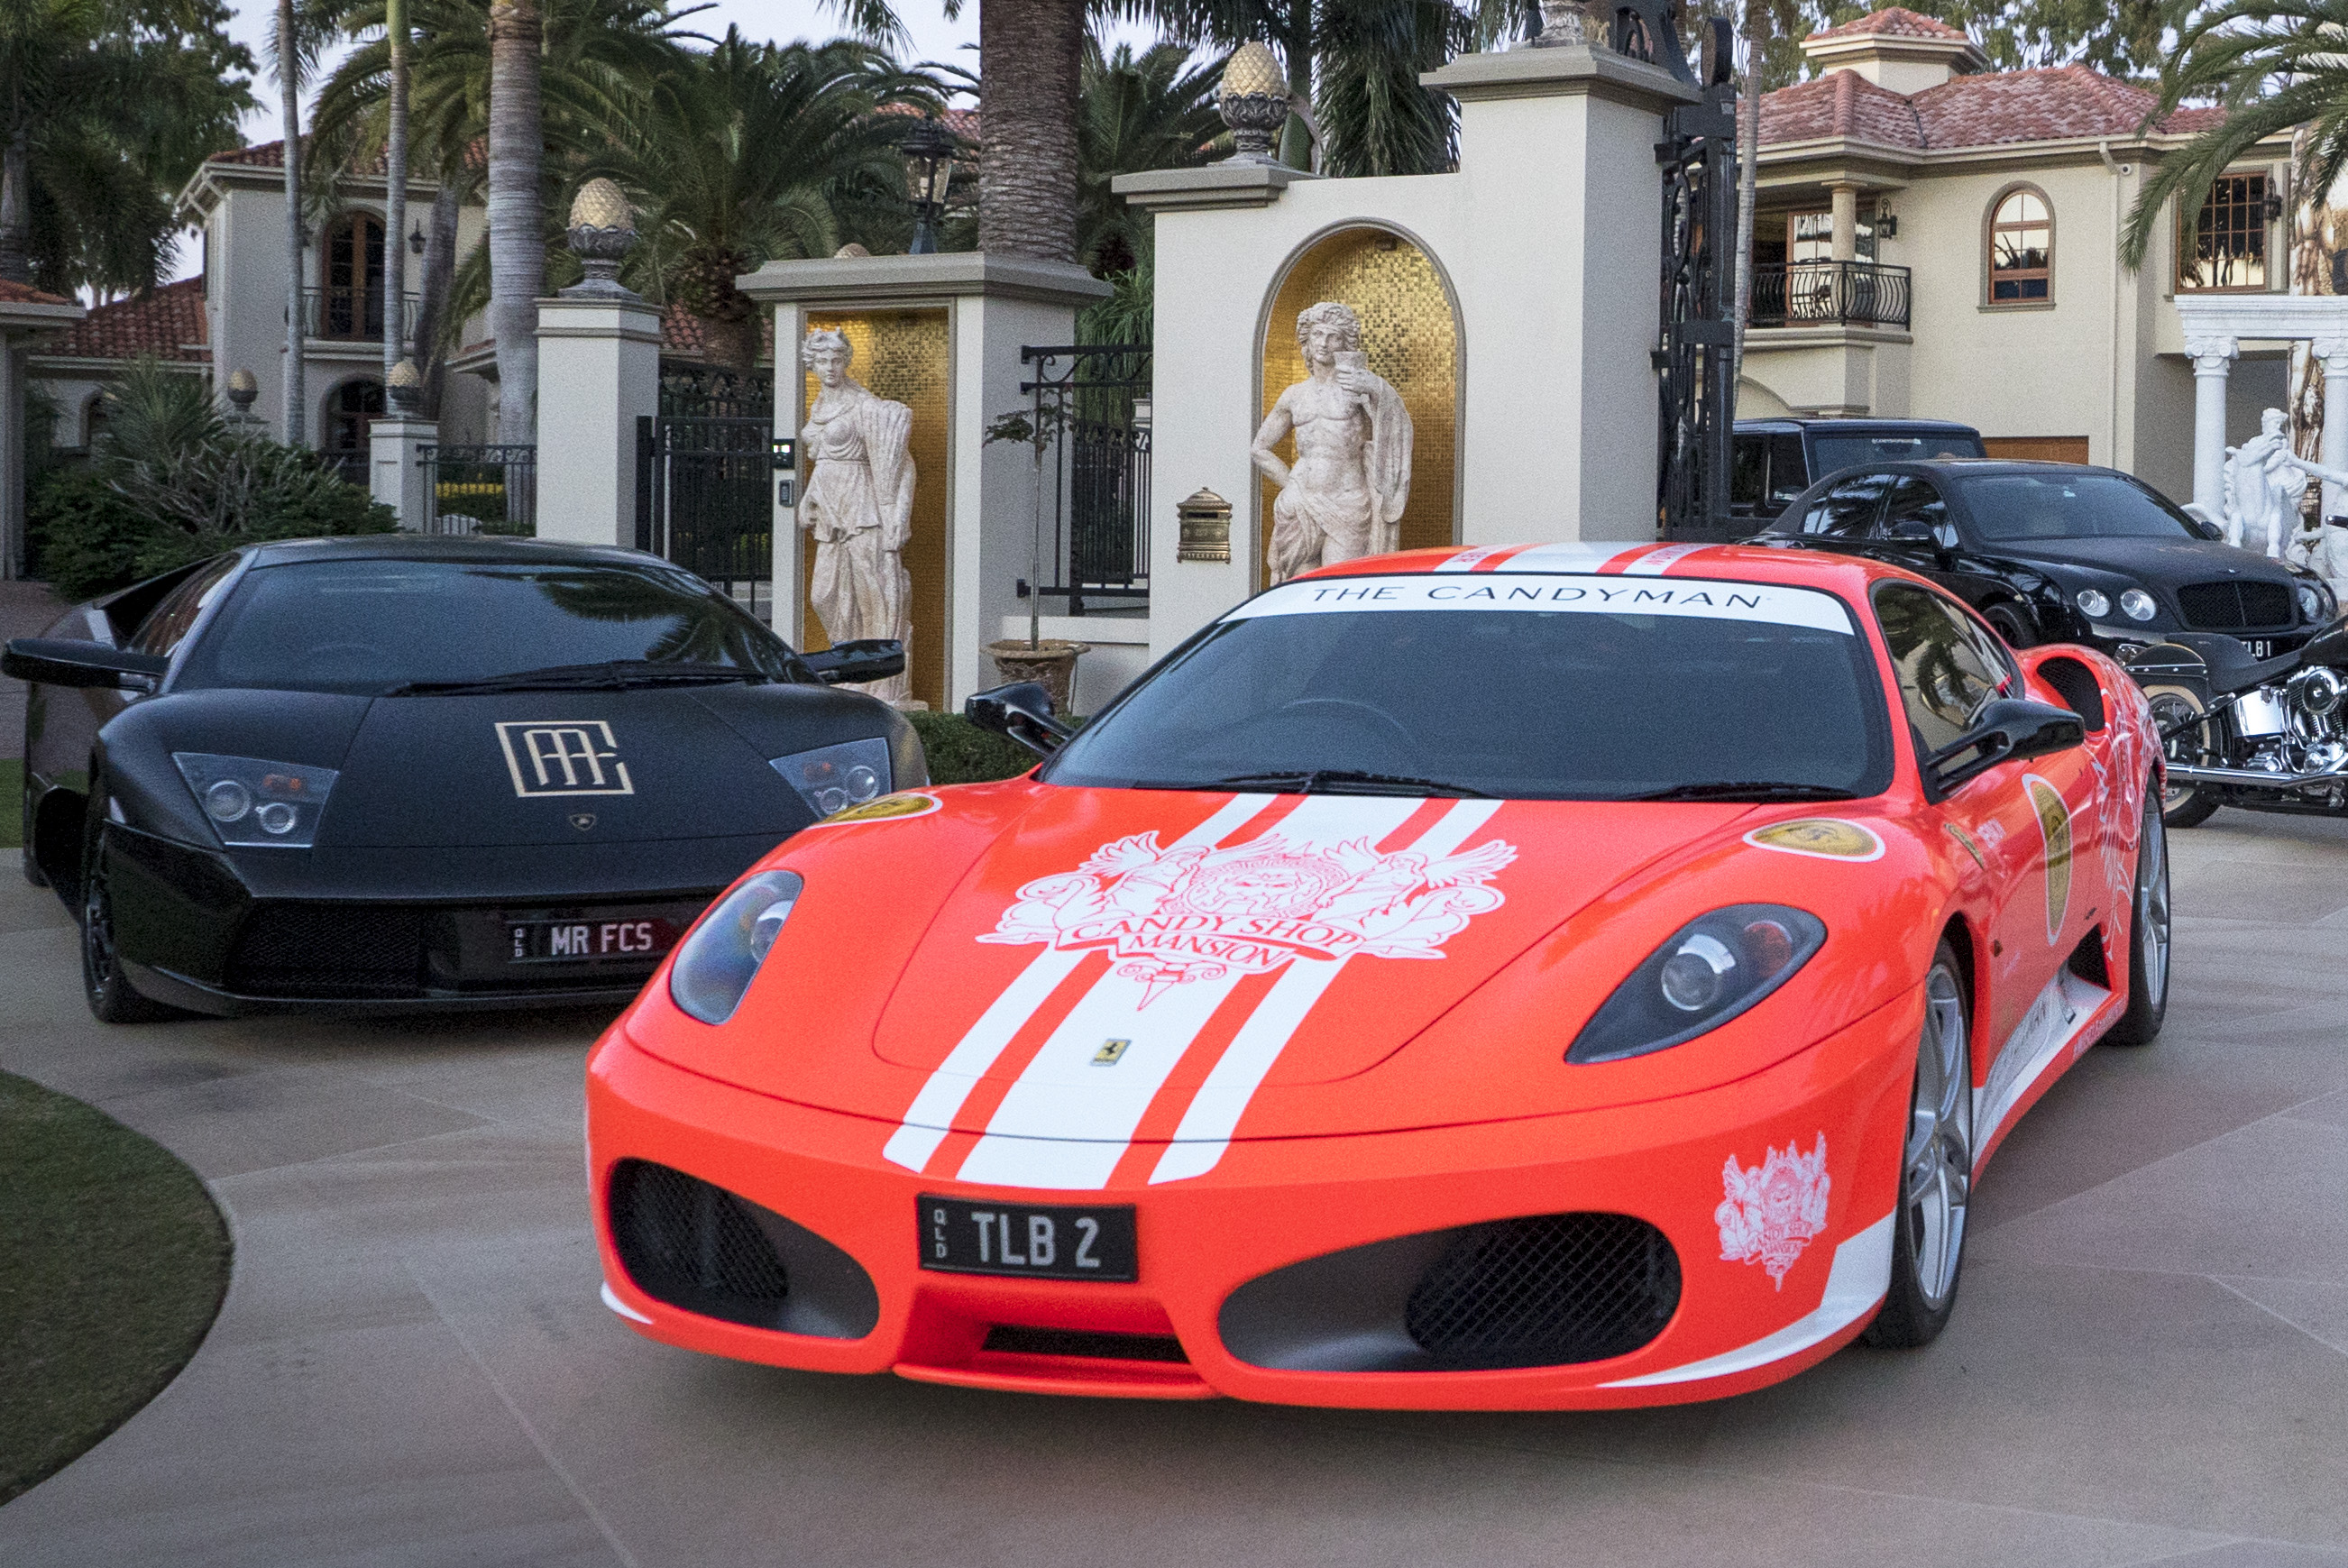 2006 Ferrari F430 Coupe | The Candy Shop Mansion